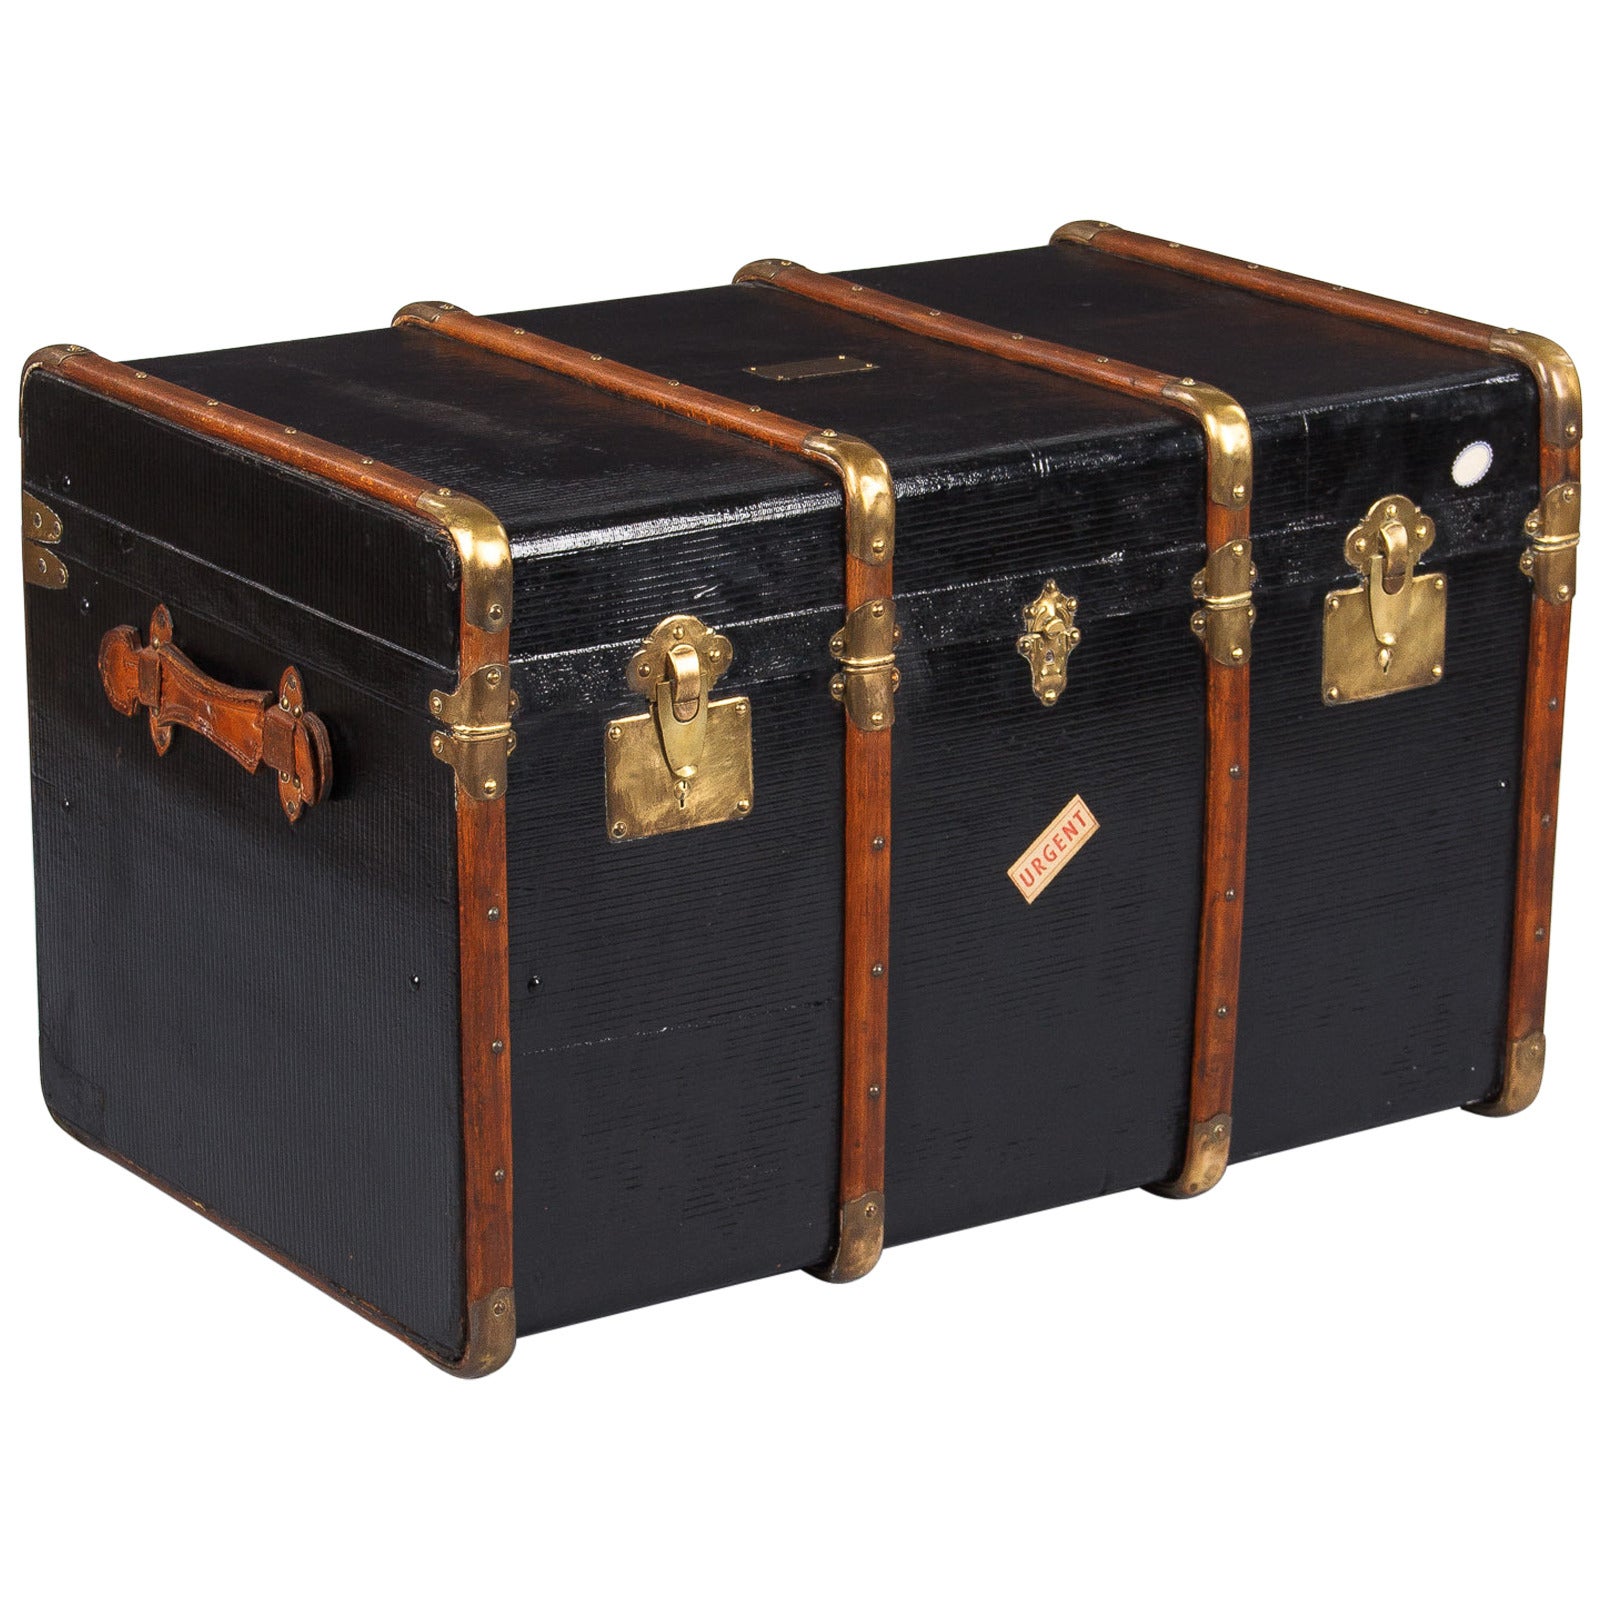 1900s French Black Traveling Trunk